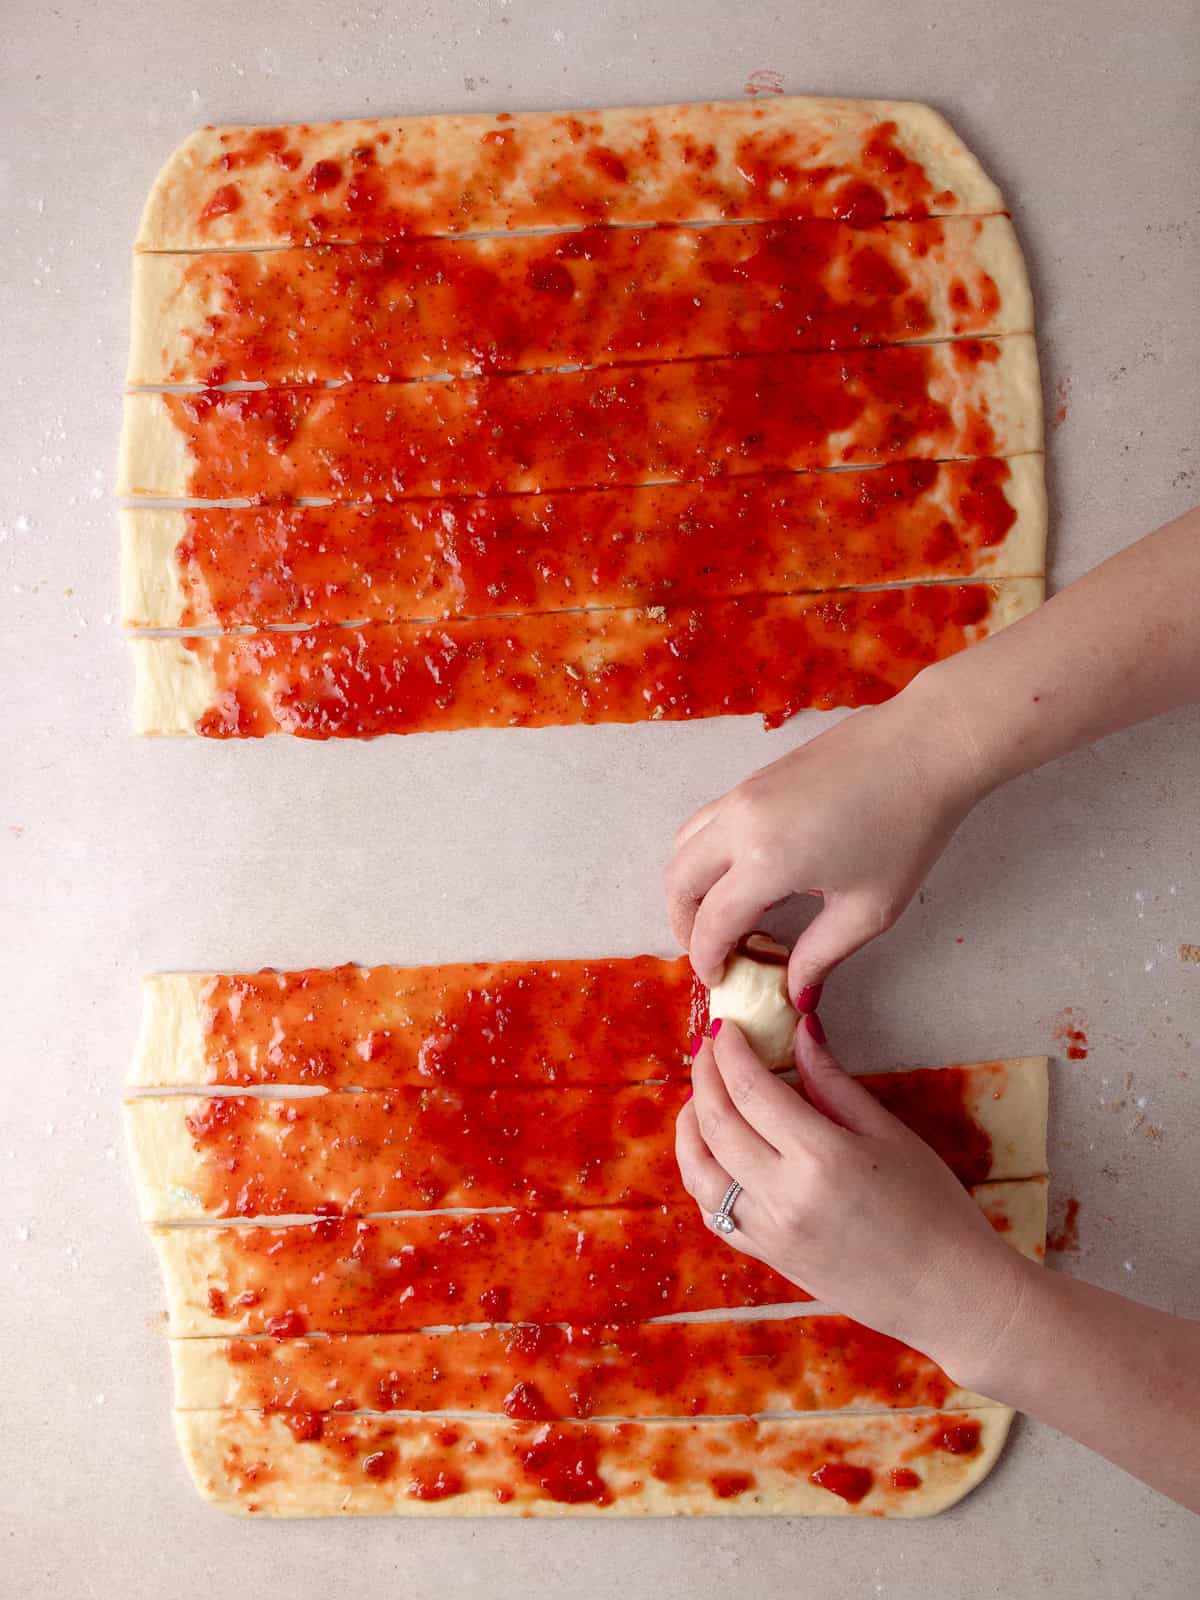 Hands are rolling the strips of dough into buns.